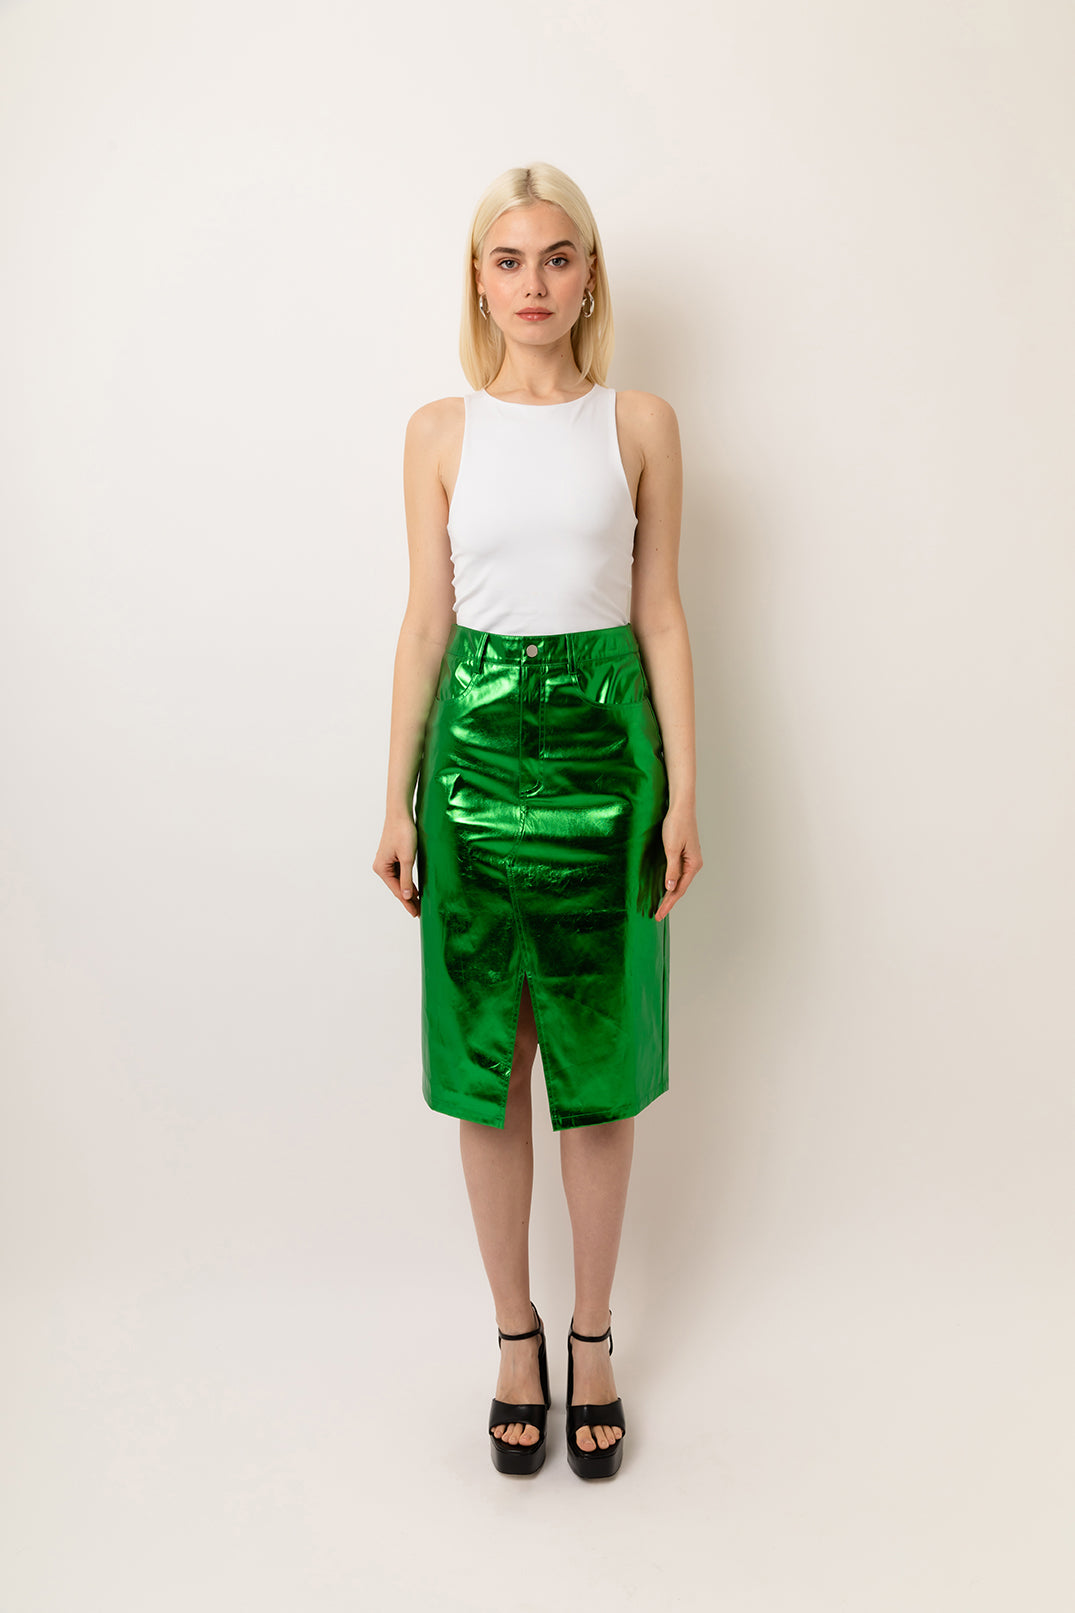 Lupe Shiny Green High Waisted Metallic Faux Leather Pencil Midi Skirt